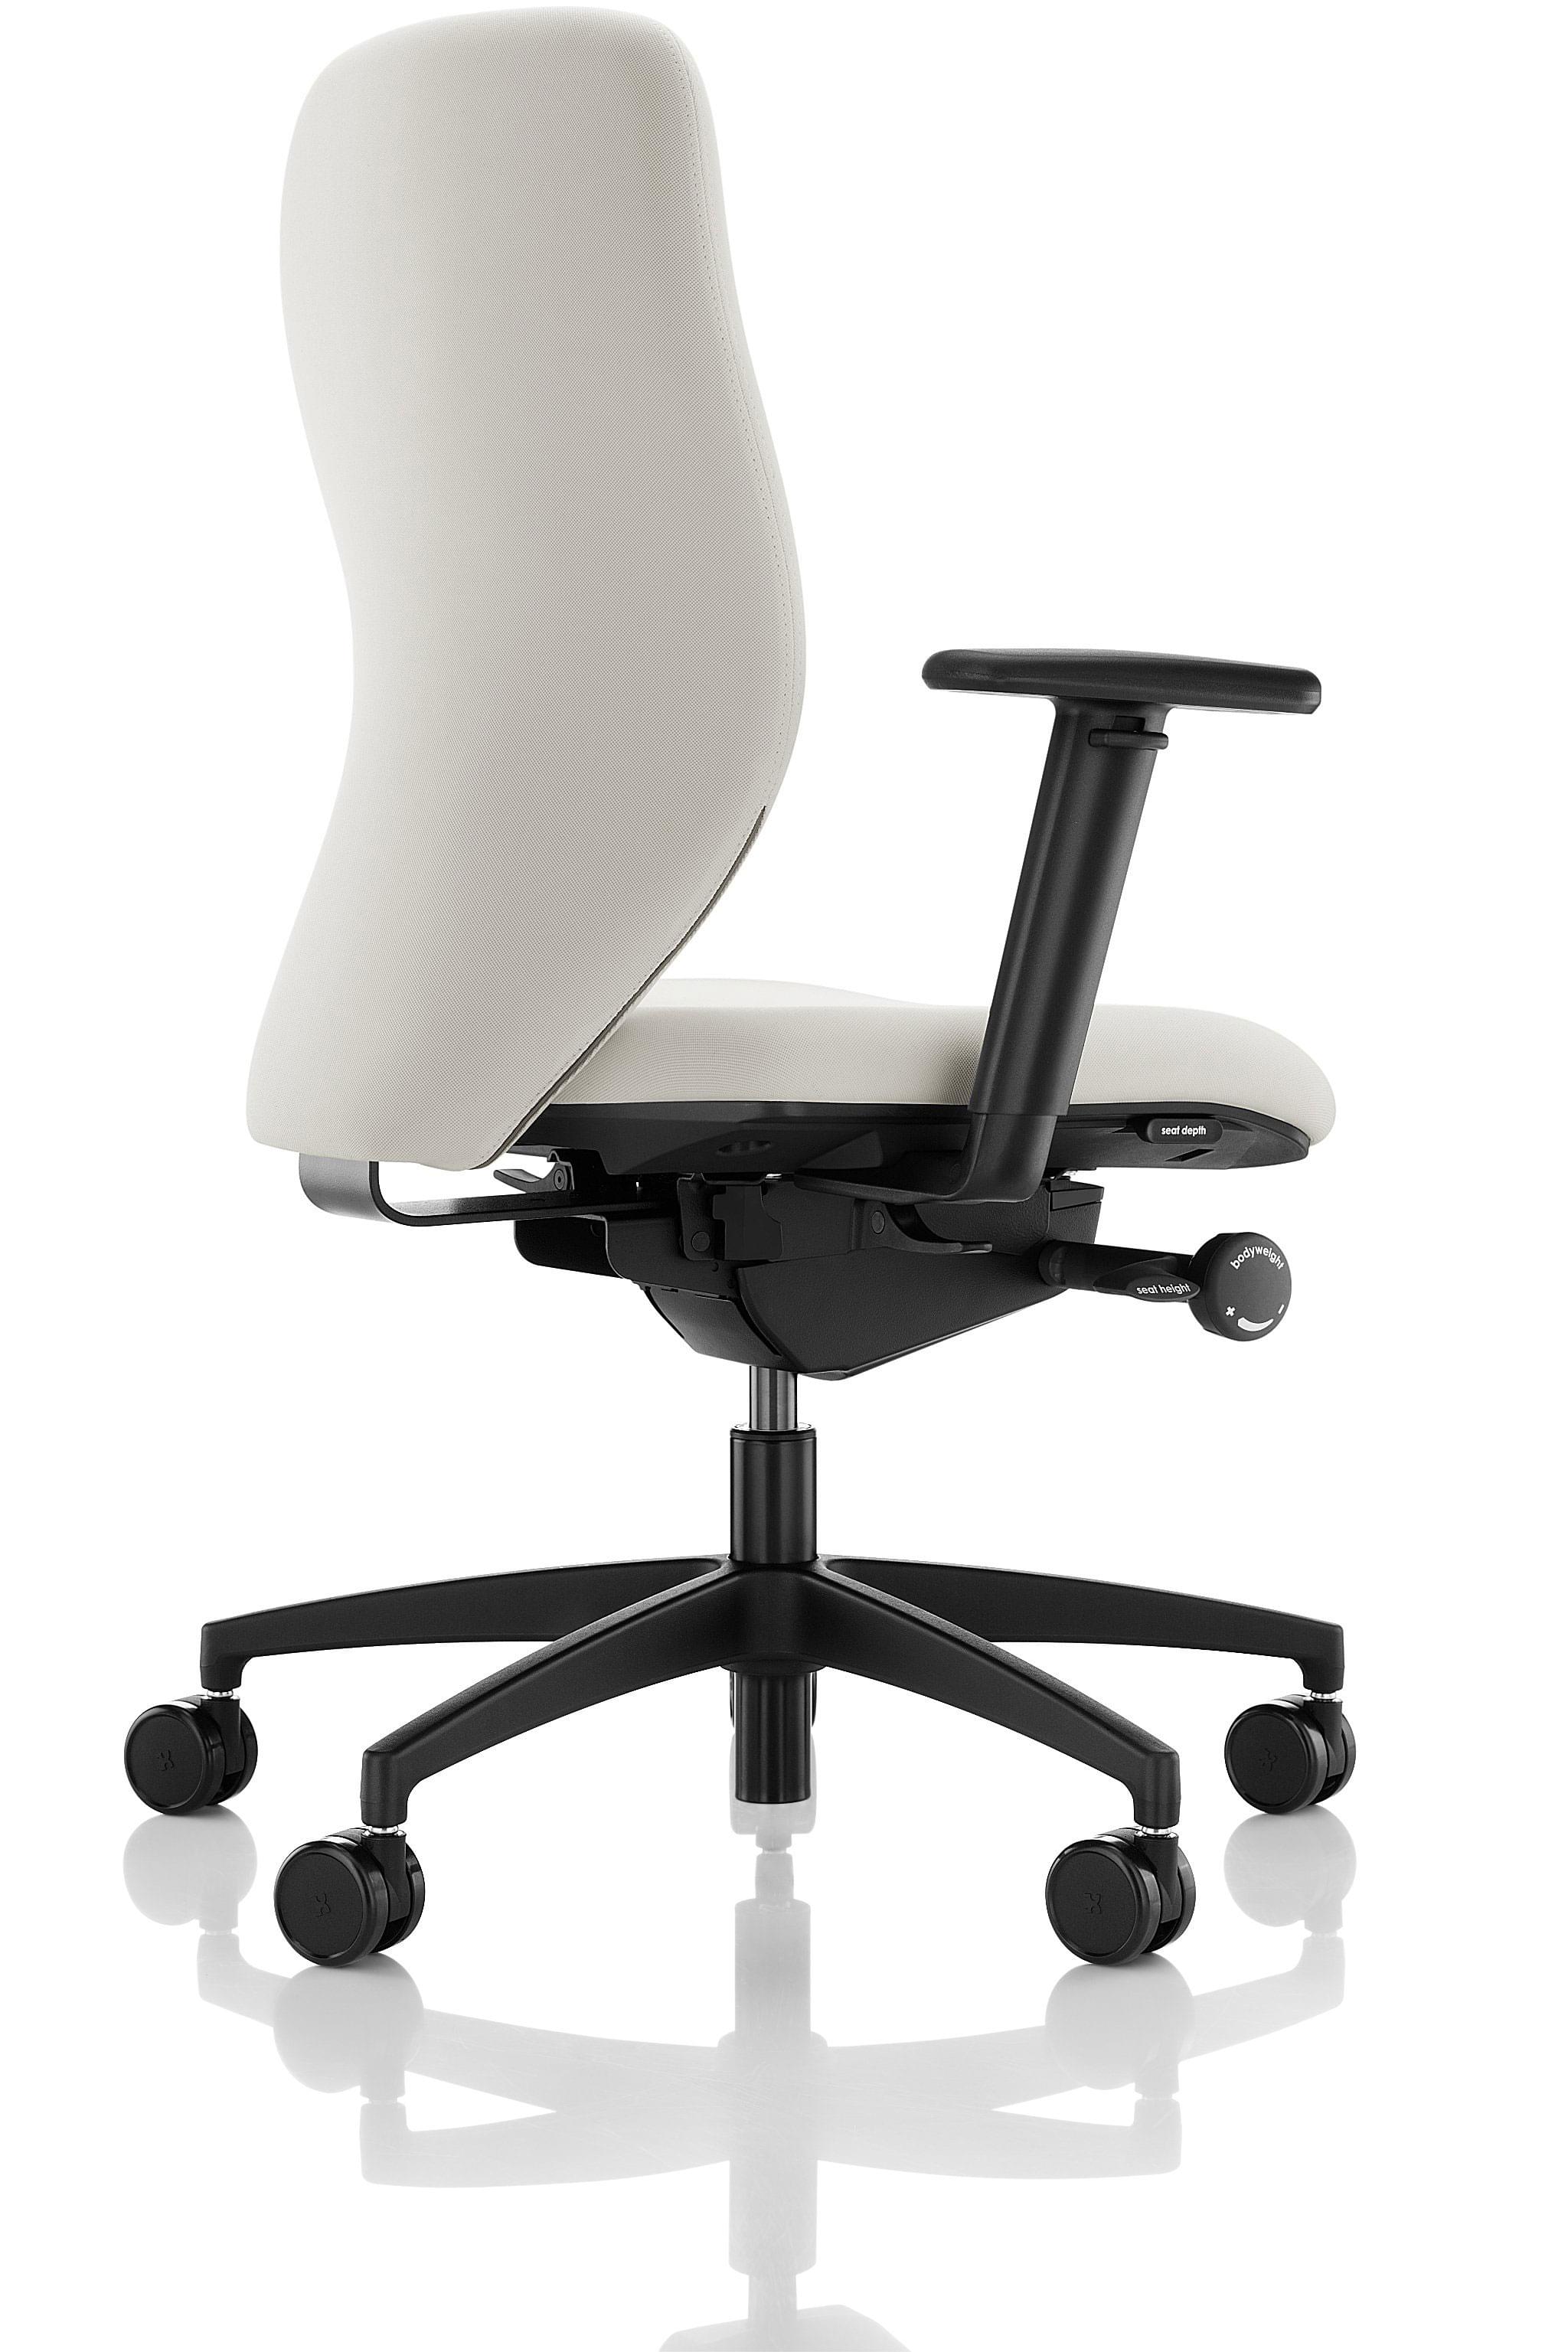 Boss Design Office Furniture Lily Chair